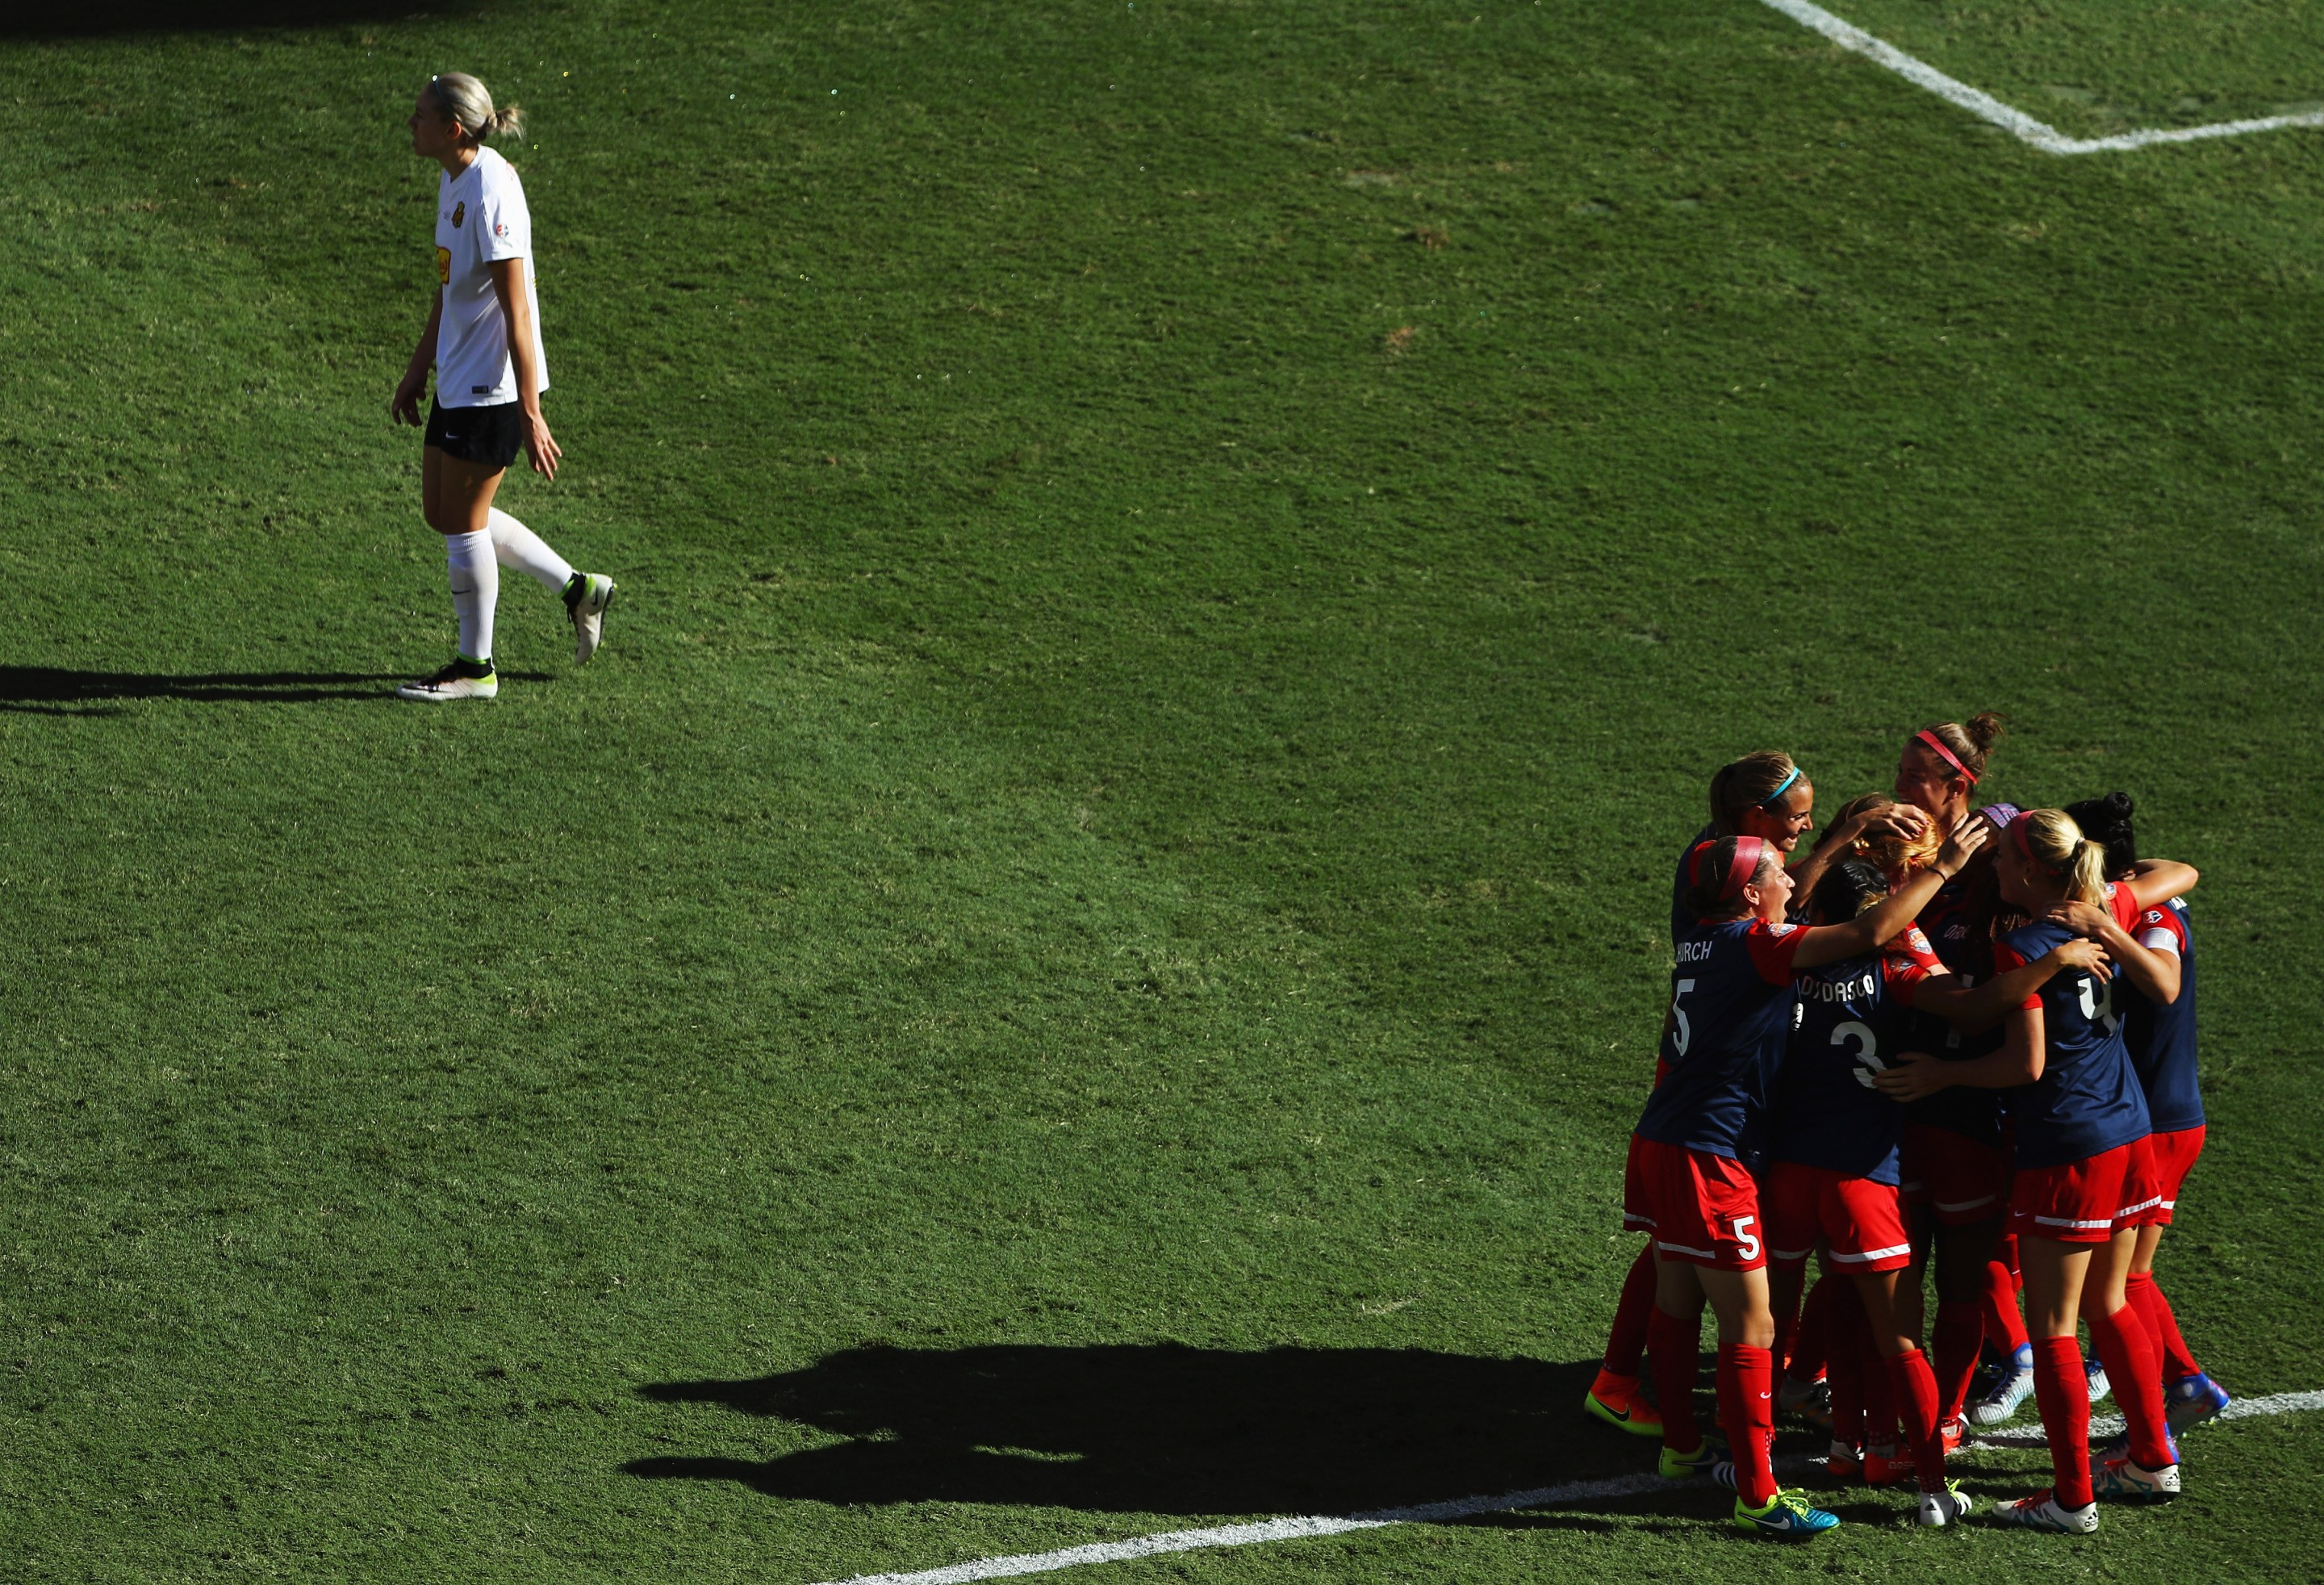 Crystal Dunn #19 of the Washington Spirit celebrates with her teammates after her goal against the Western New York Flash during the first half of the 2016 NWSL Championship at BBVA Compass Stadium on October 9, 2016 in Houston, Texas.